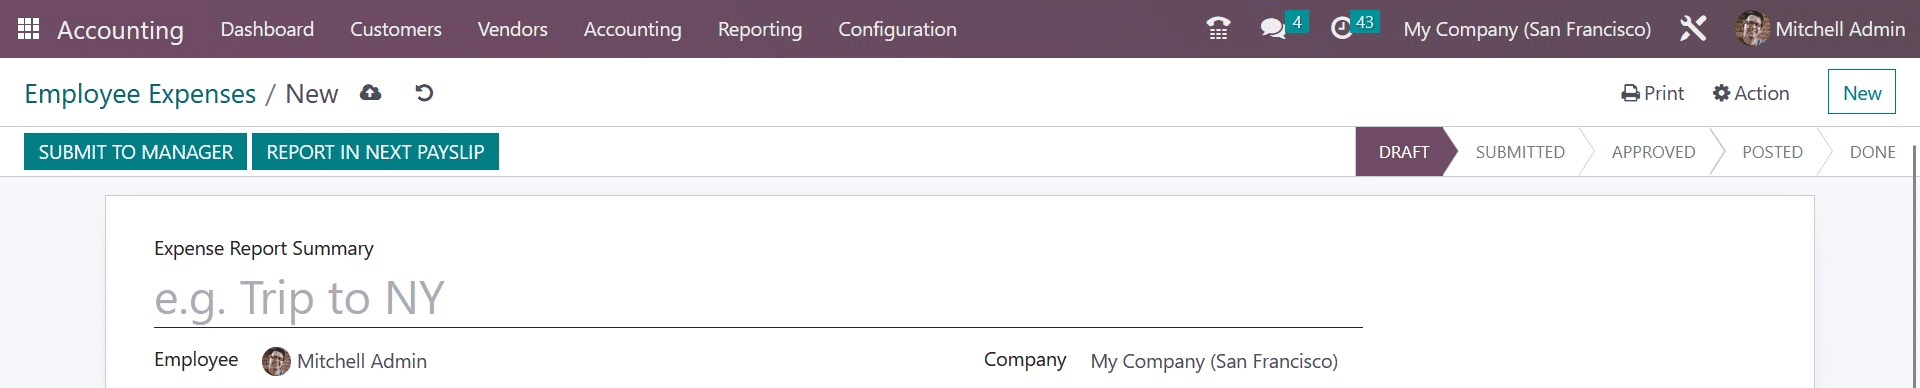 How to Manage Employee Expenses in Odoo 16 Employee App-cybrosys